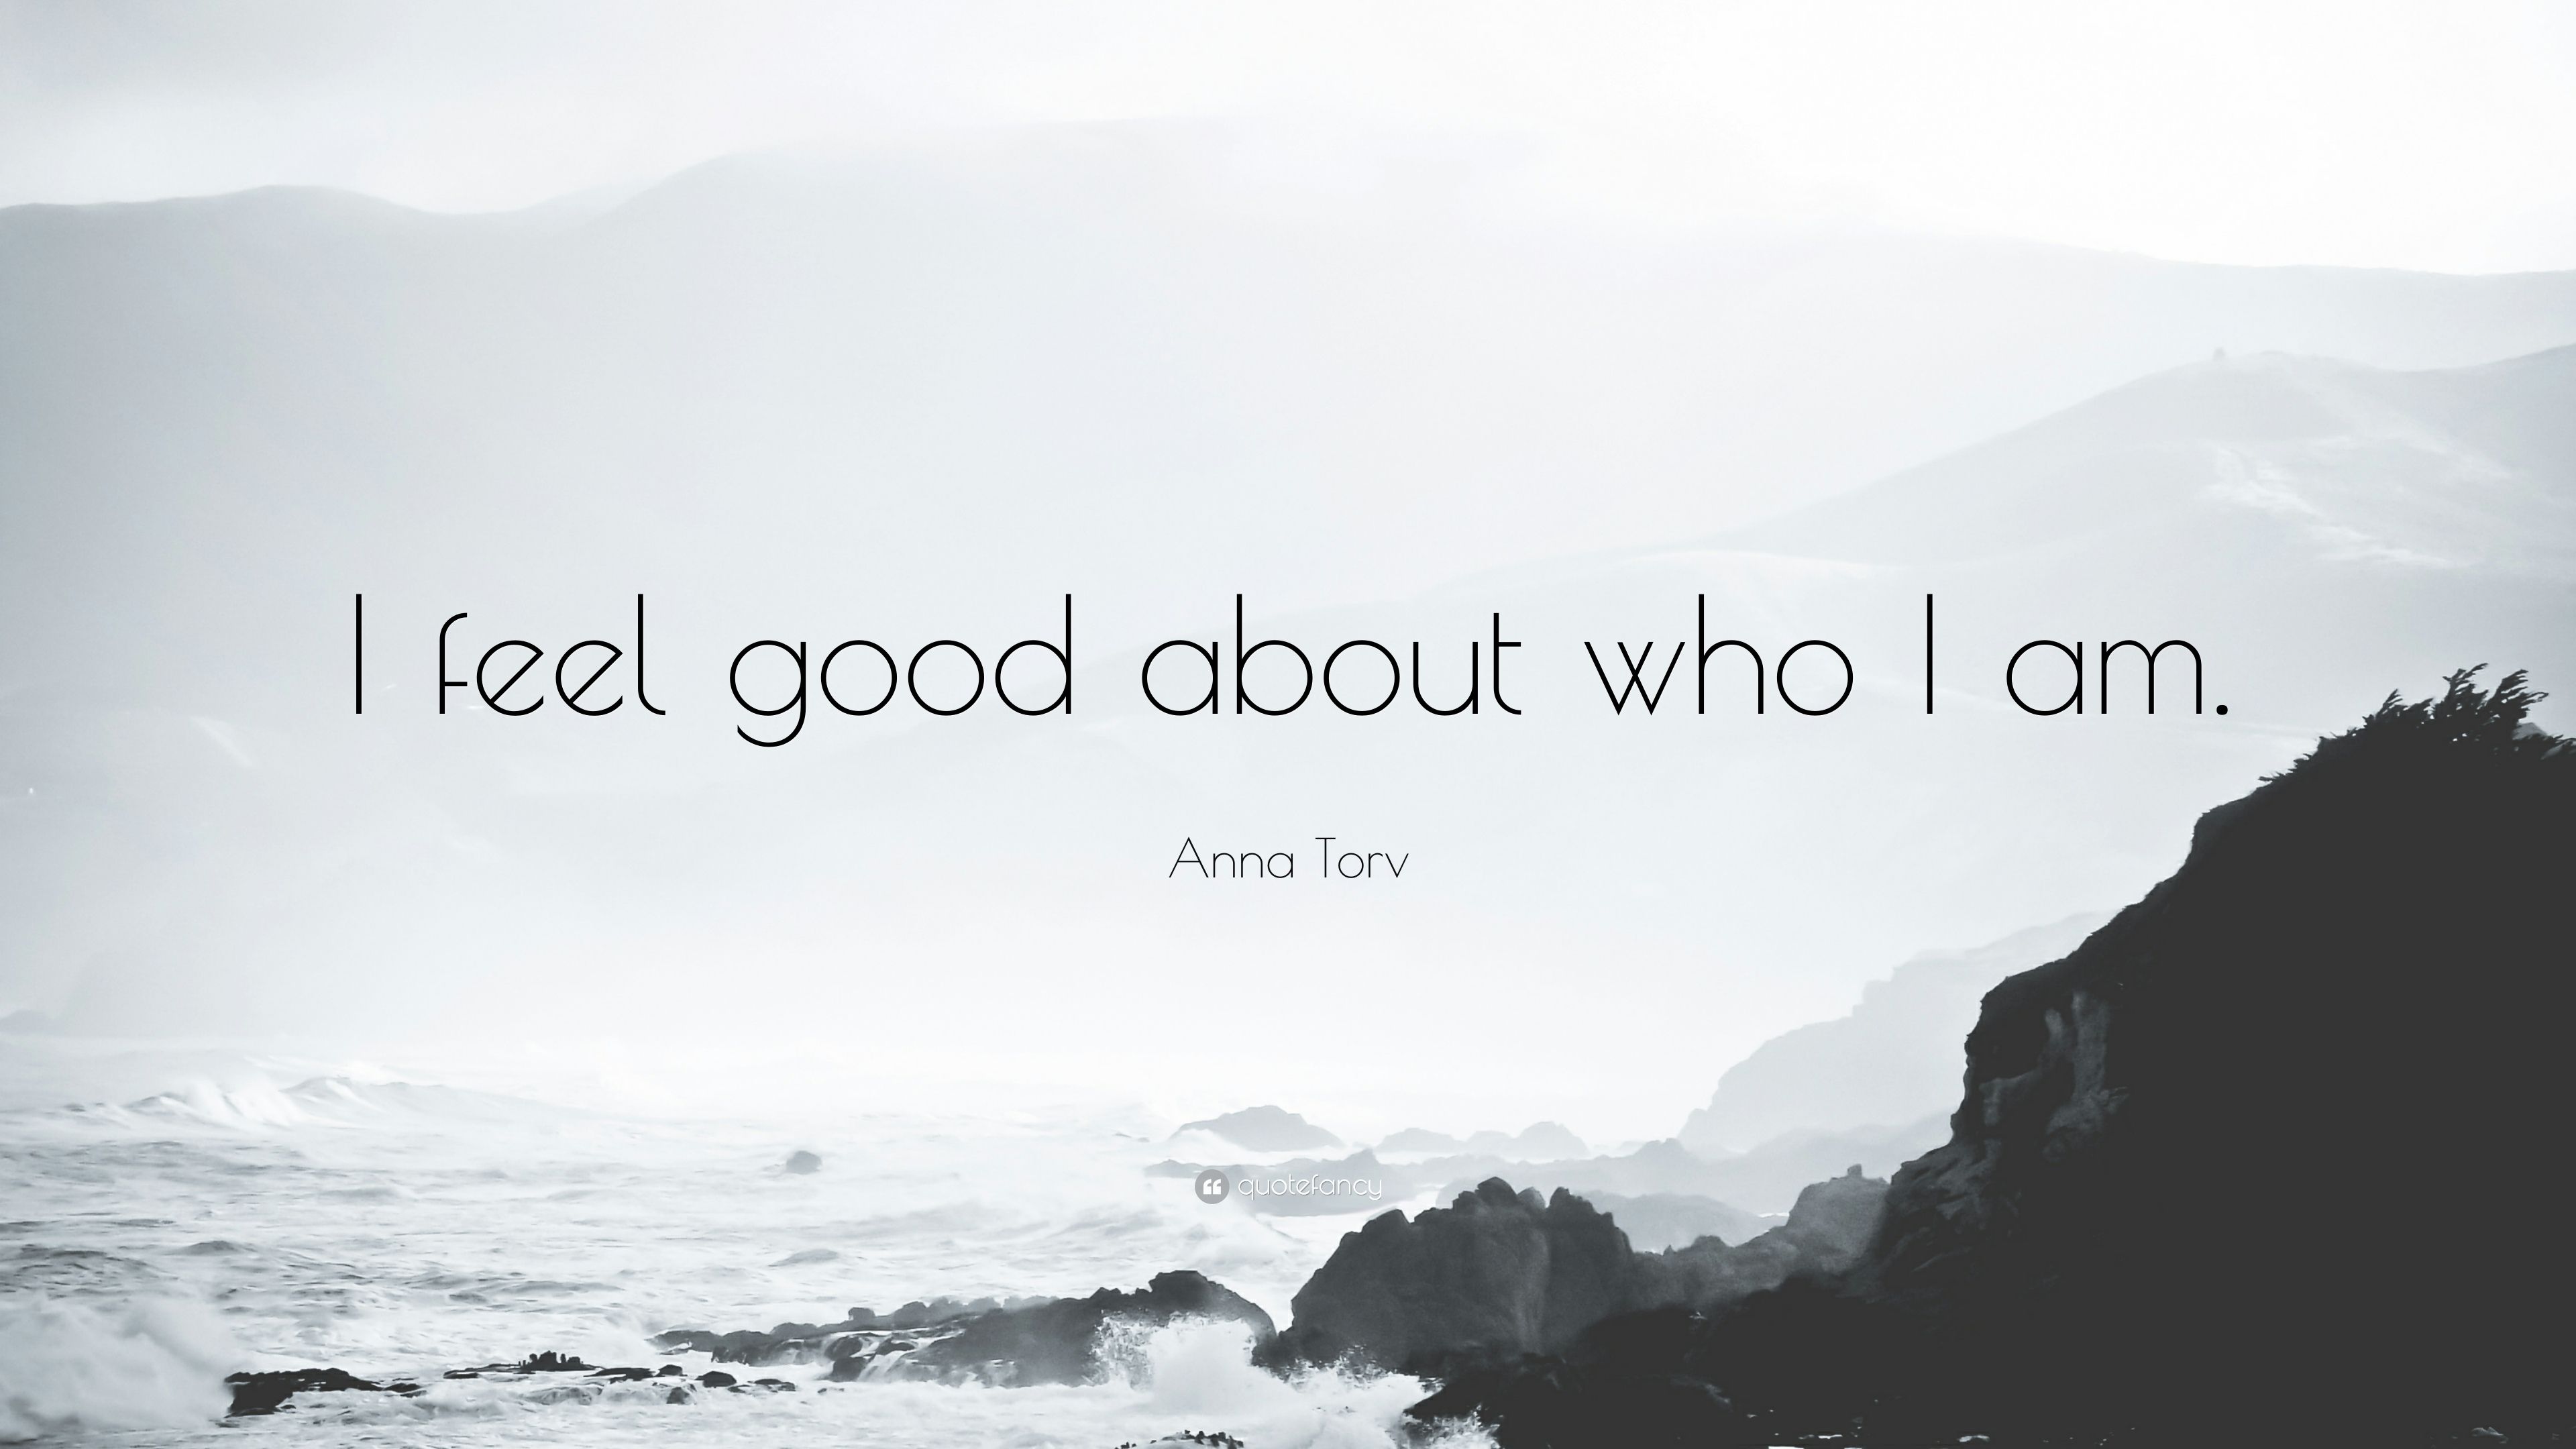 Anna Torv Quote: “I feel good about who I am.” 7 wallpaper